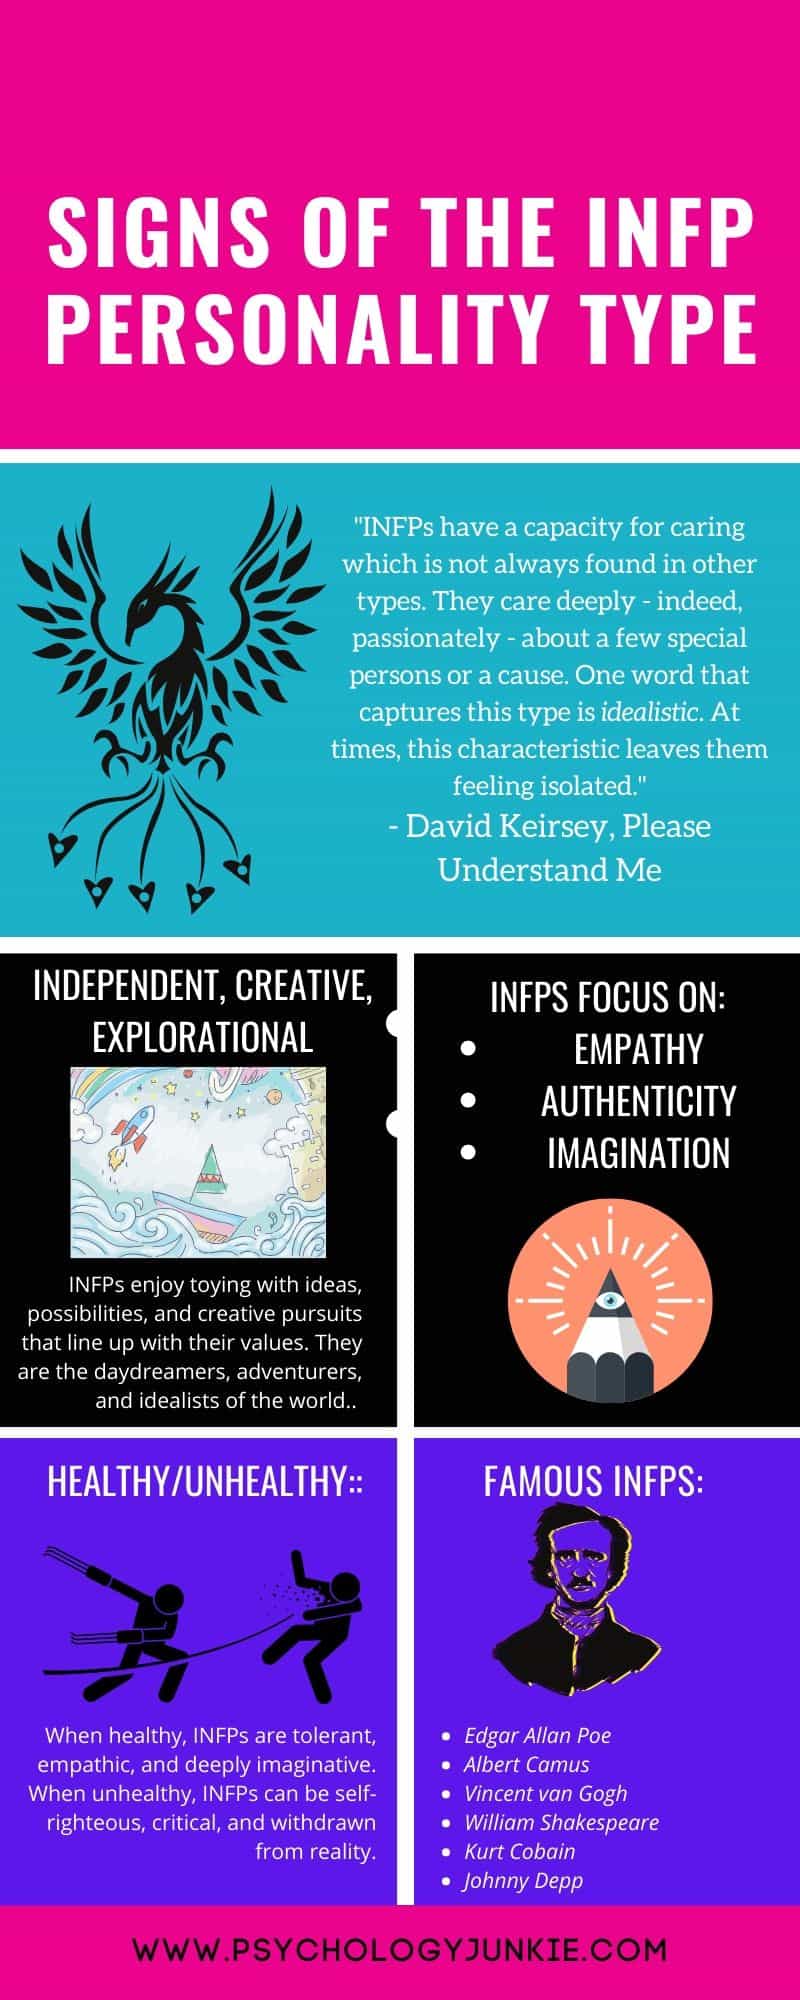 Get an in-depth look at what it really means to be an #INFP personality type. #MBTI #Personality